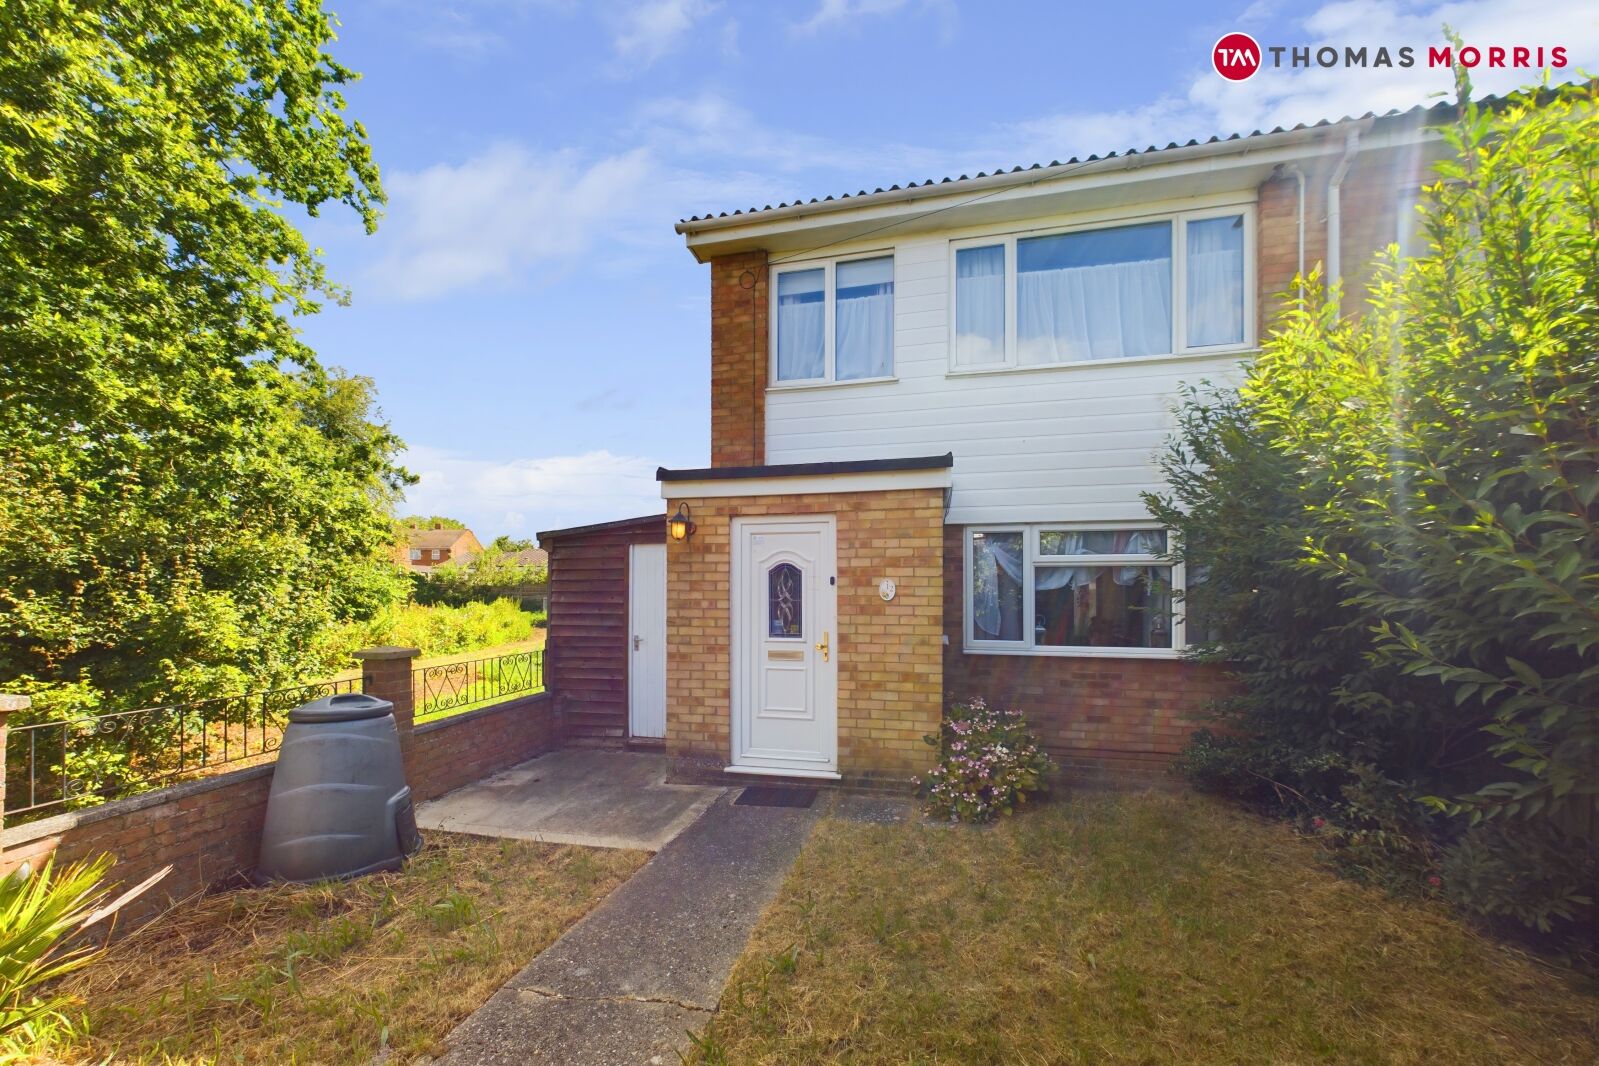 3 bedroom end terraced house for sale The Grove, Biggleswade, SG18, main image